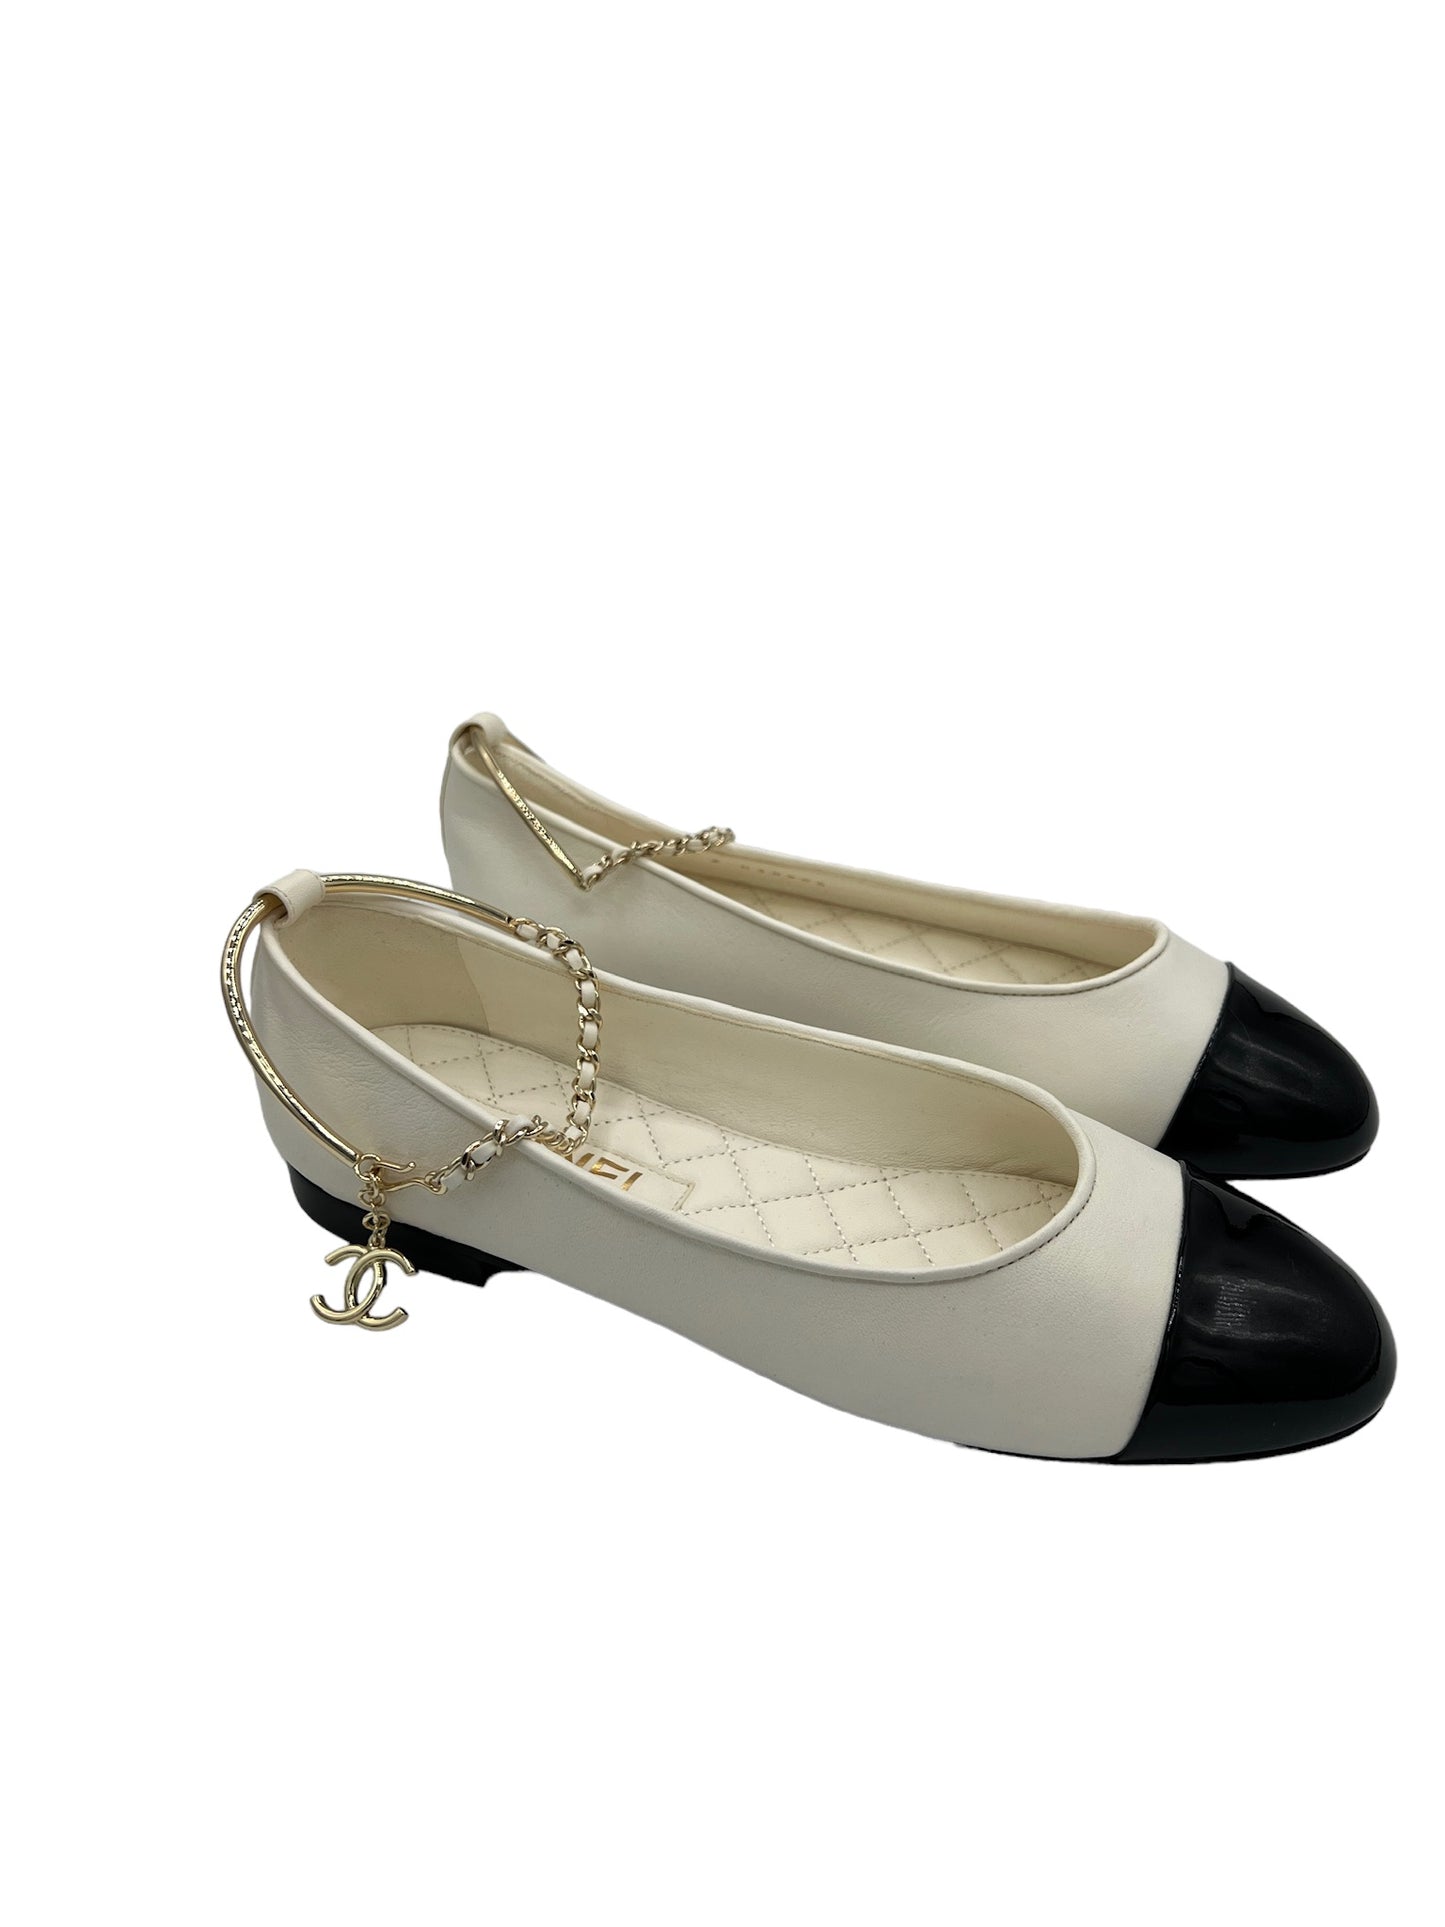 CHANEL - White Patent Ballerina Shoes